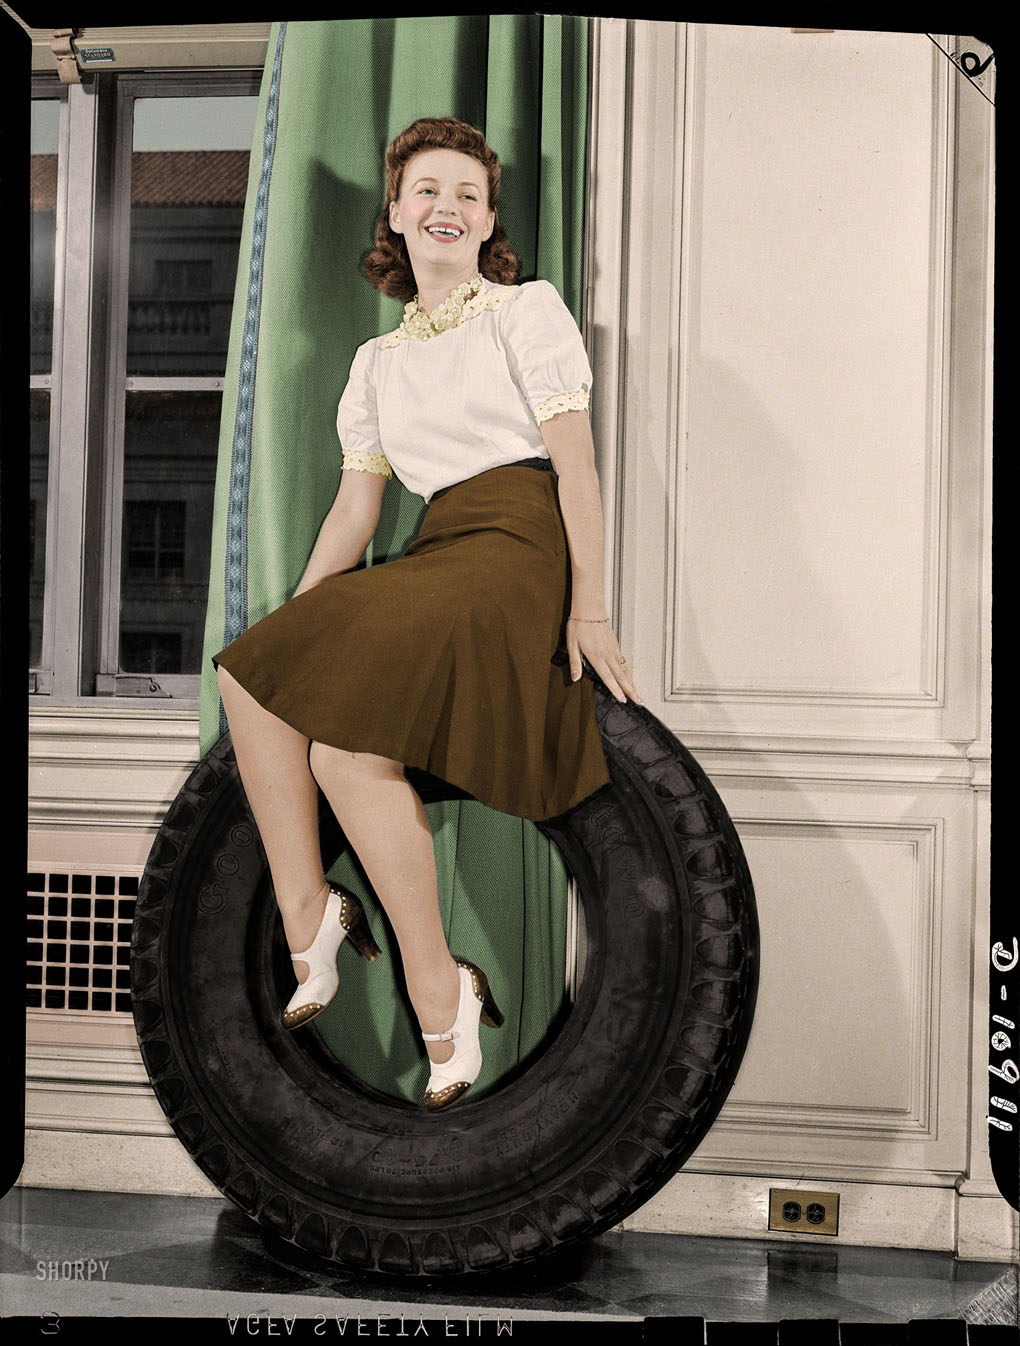 Shorpy Historical Picture Archive :: On a Roll (Colorized): 1942 high